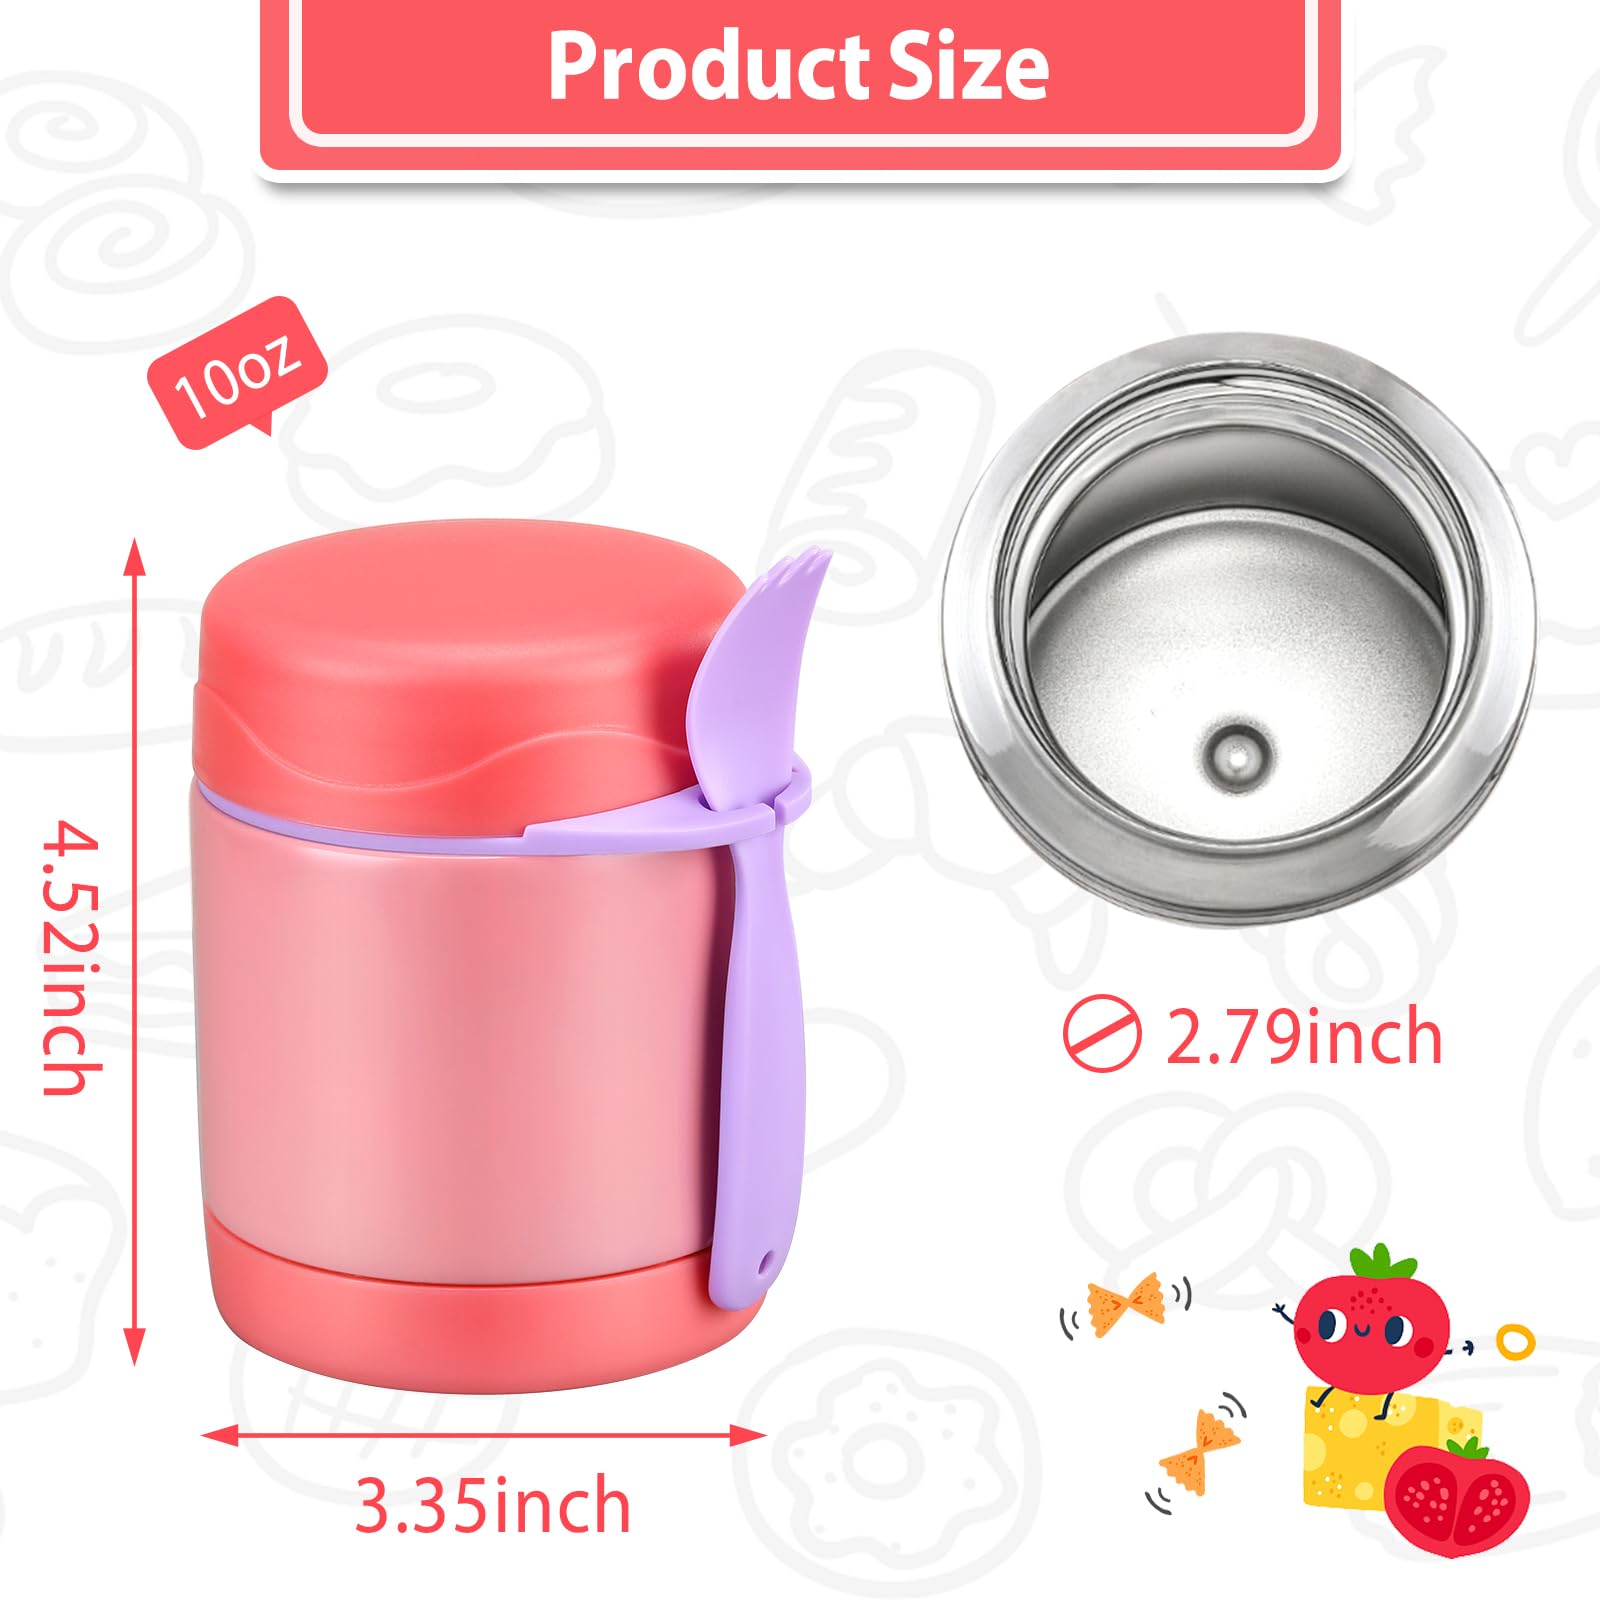 10oz Soup Thermo for Hot Food Kids,Lunch Thermo Kids Food Jar with Spoon Hot Insulated Food Containers,Leak Proof Stainless Steel Wide Mouth Lunch Food Thermo Jar for School(Pink)